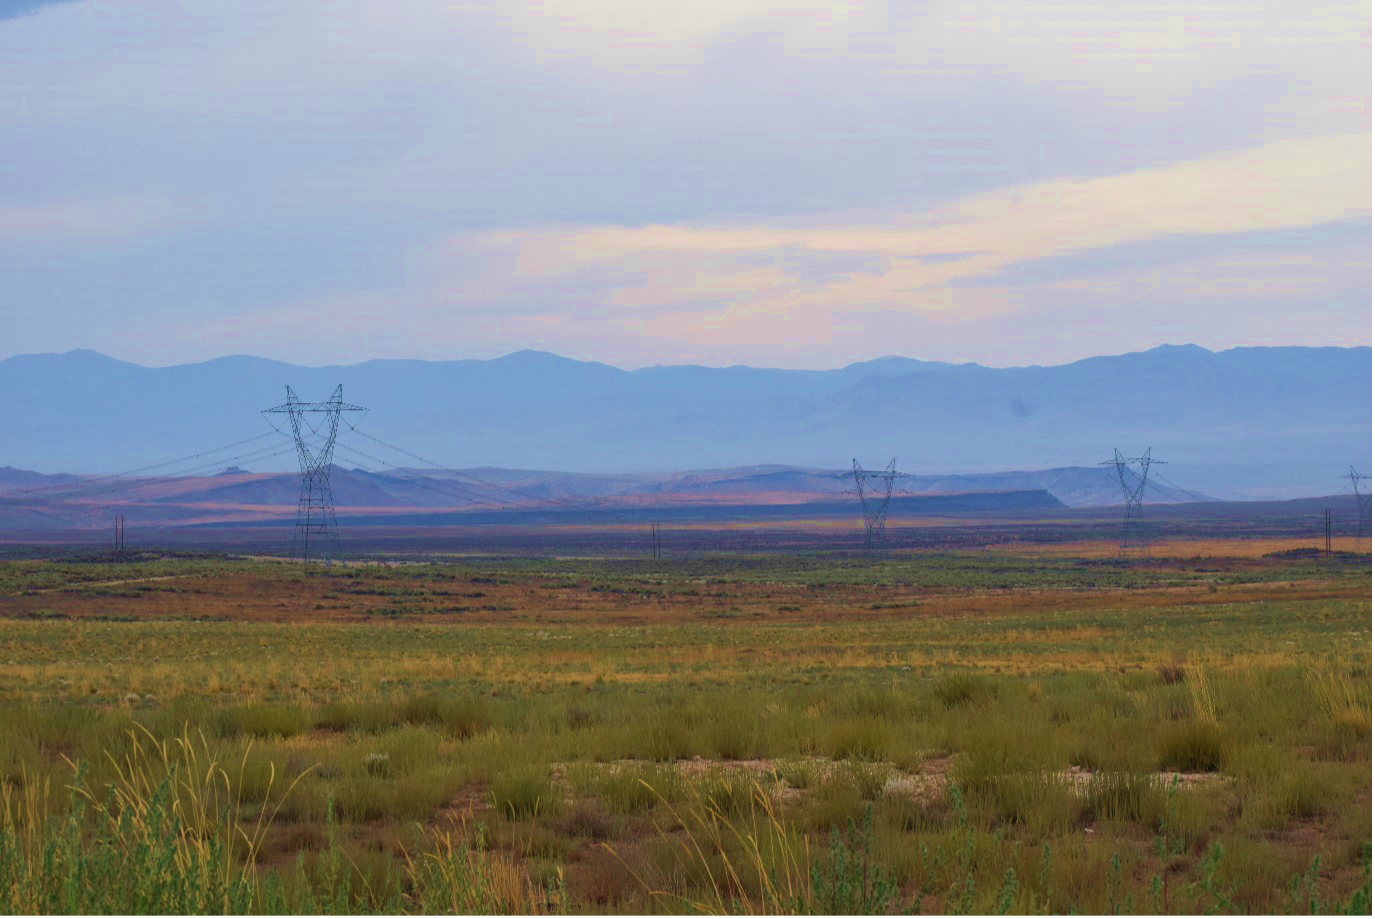 a landscape of mixed grasses and weeds stretches toward mountains and bluffs in the distance. Immense power transmission towers dot the landscape, connected by power lines.